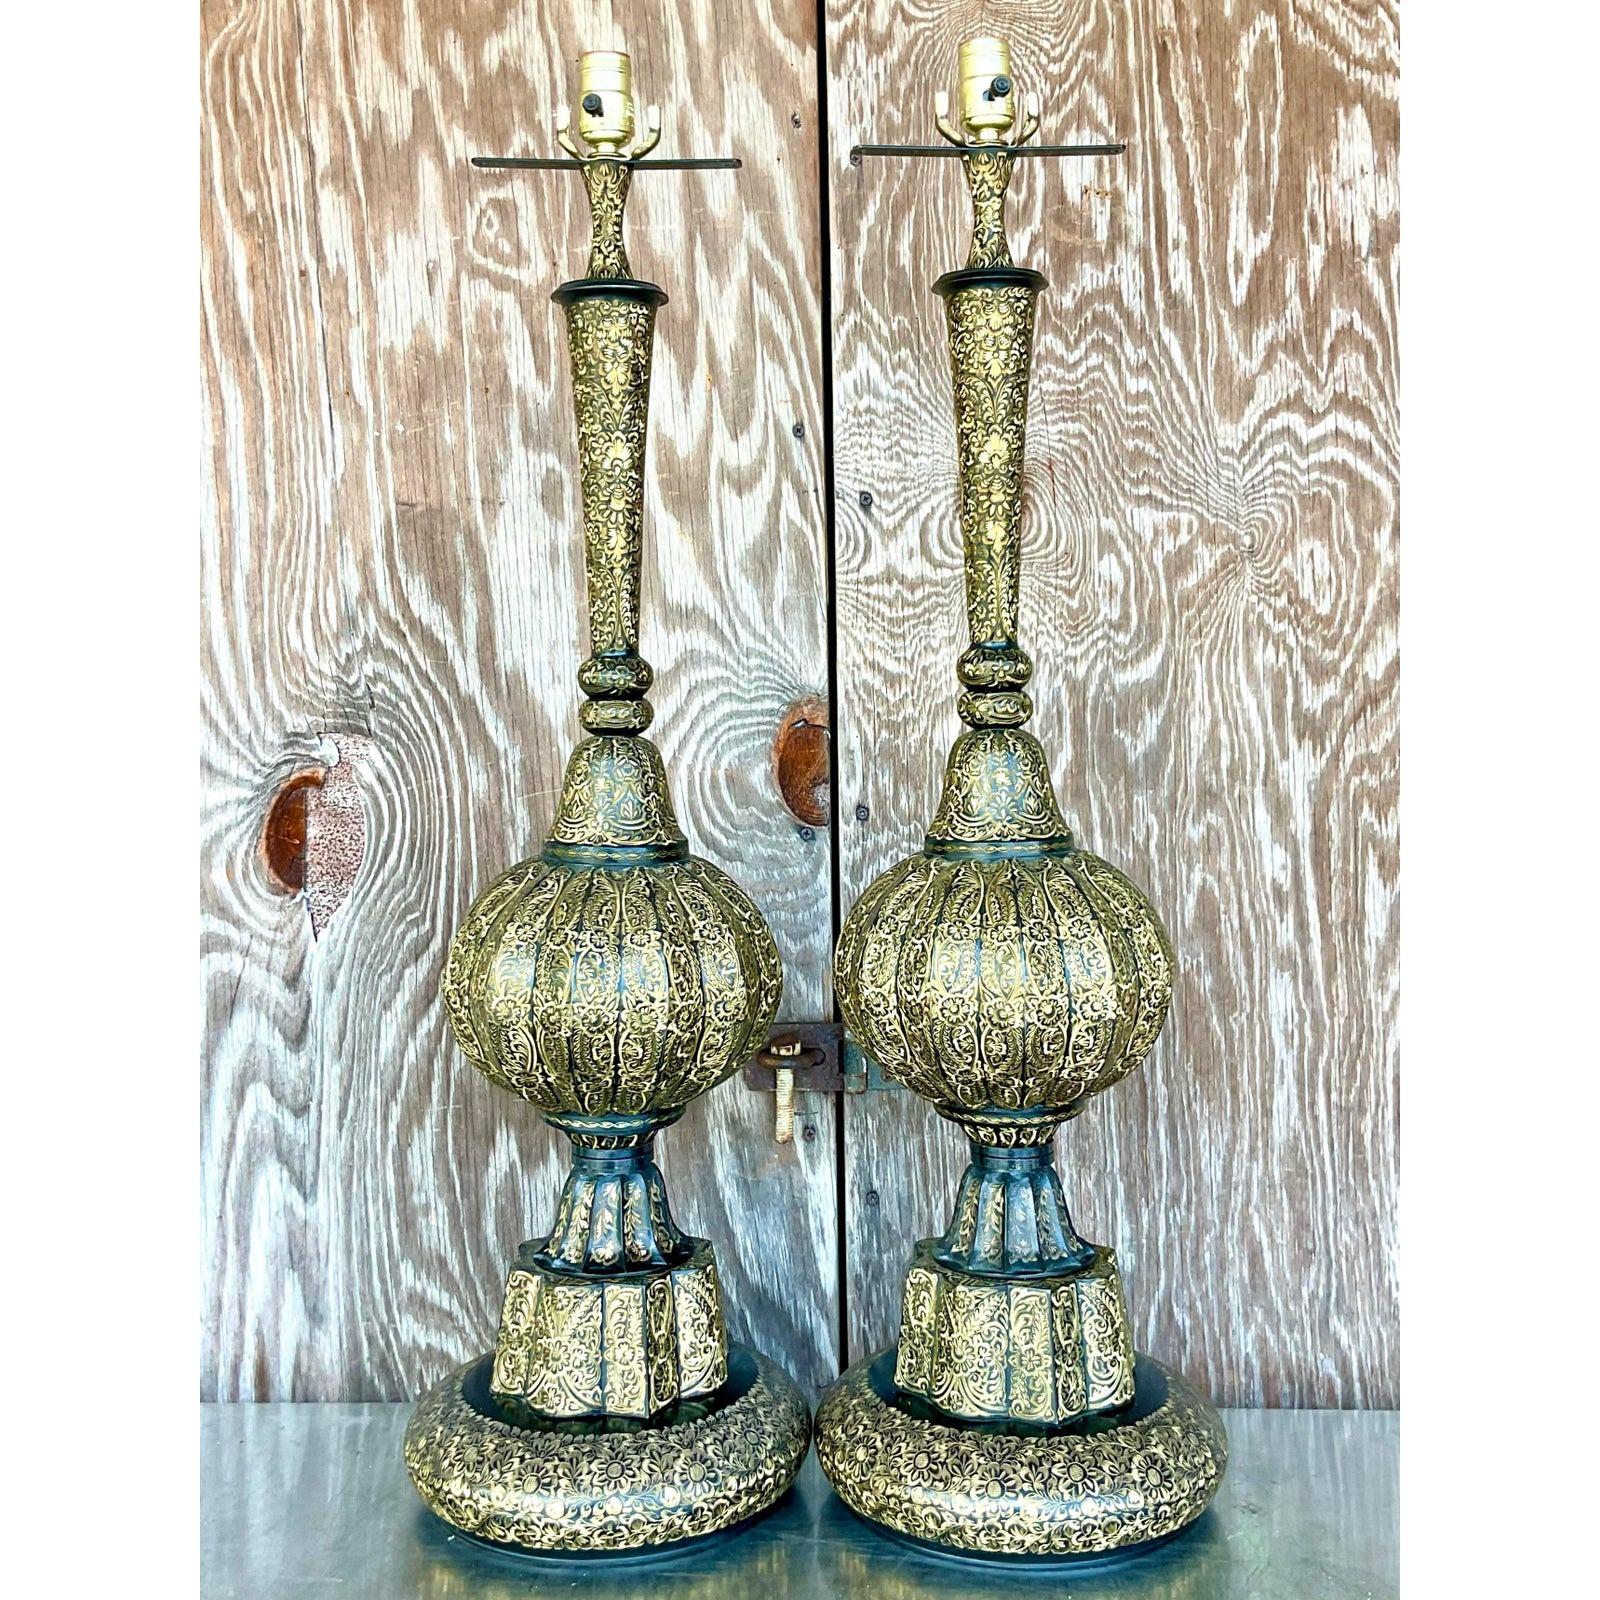 Vintage Boho Moroccan Etched Enamel and Brass Lamps - a Pair In Good Condition For Sale In west palm beach, FL